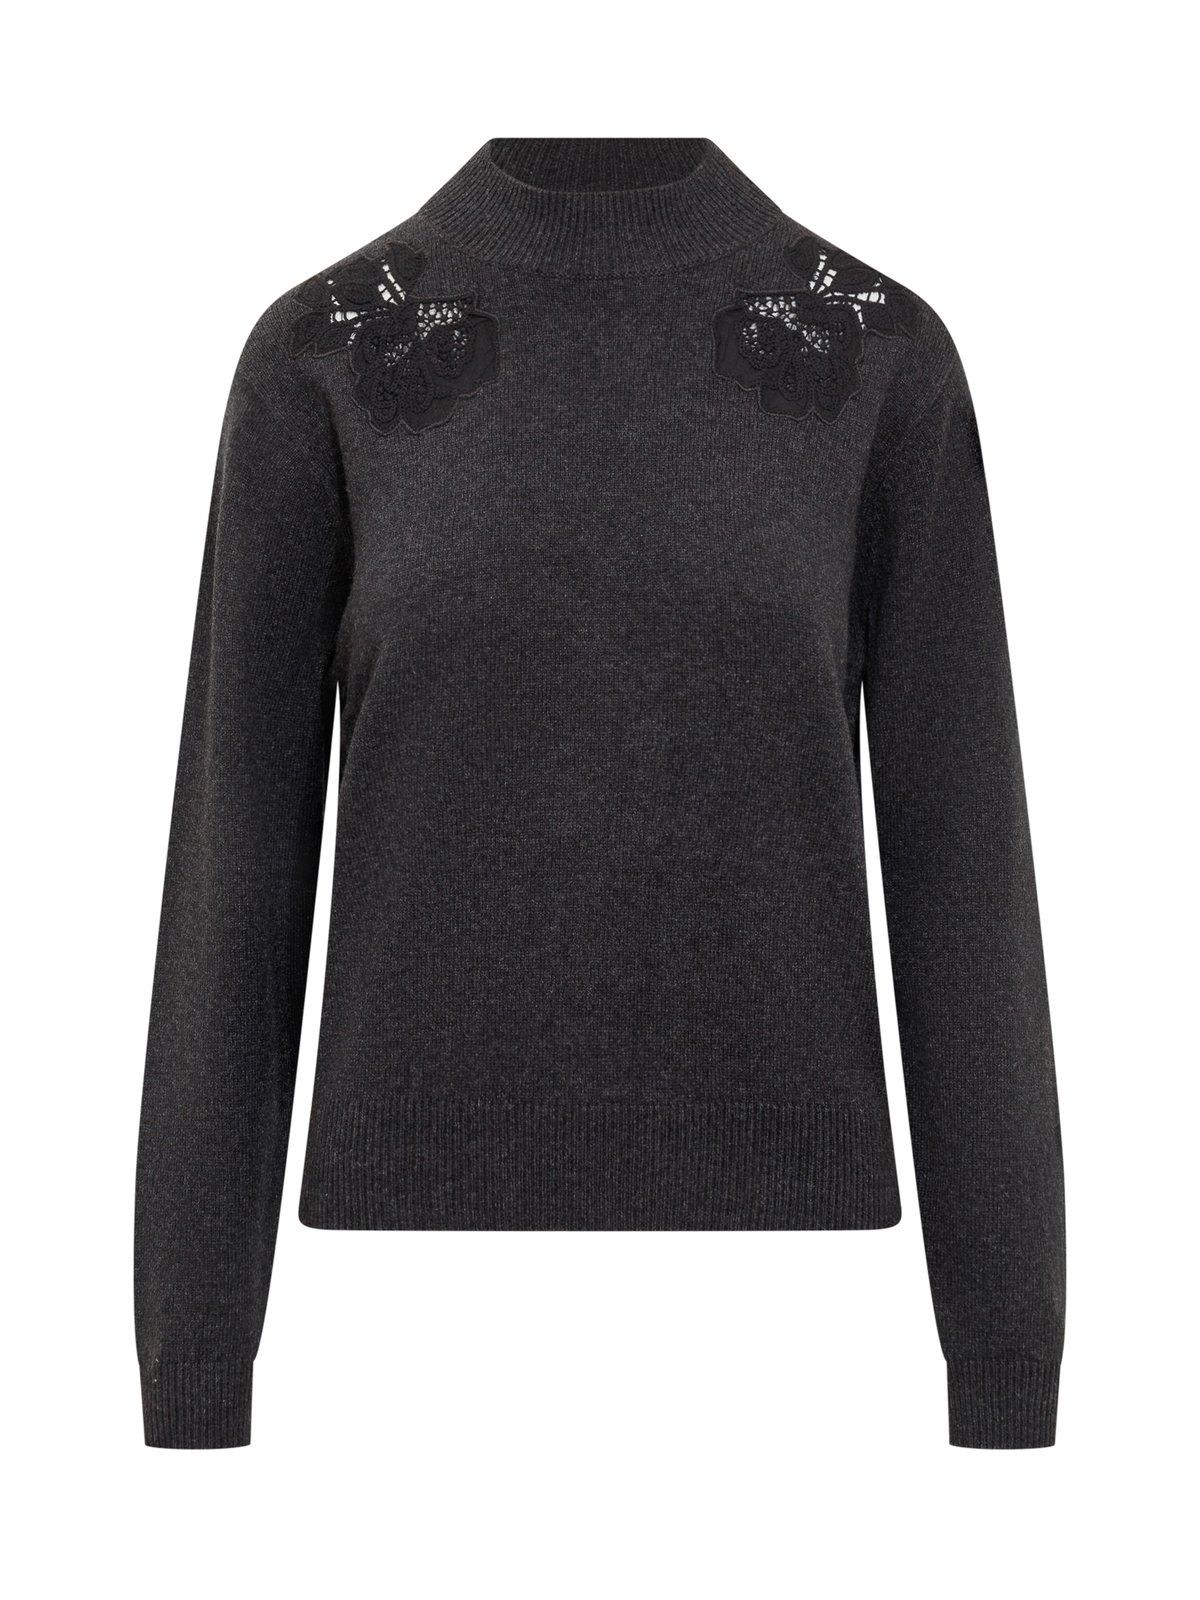 See by Chloé High-neck Knitted Jumper